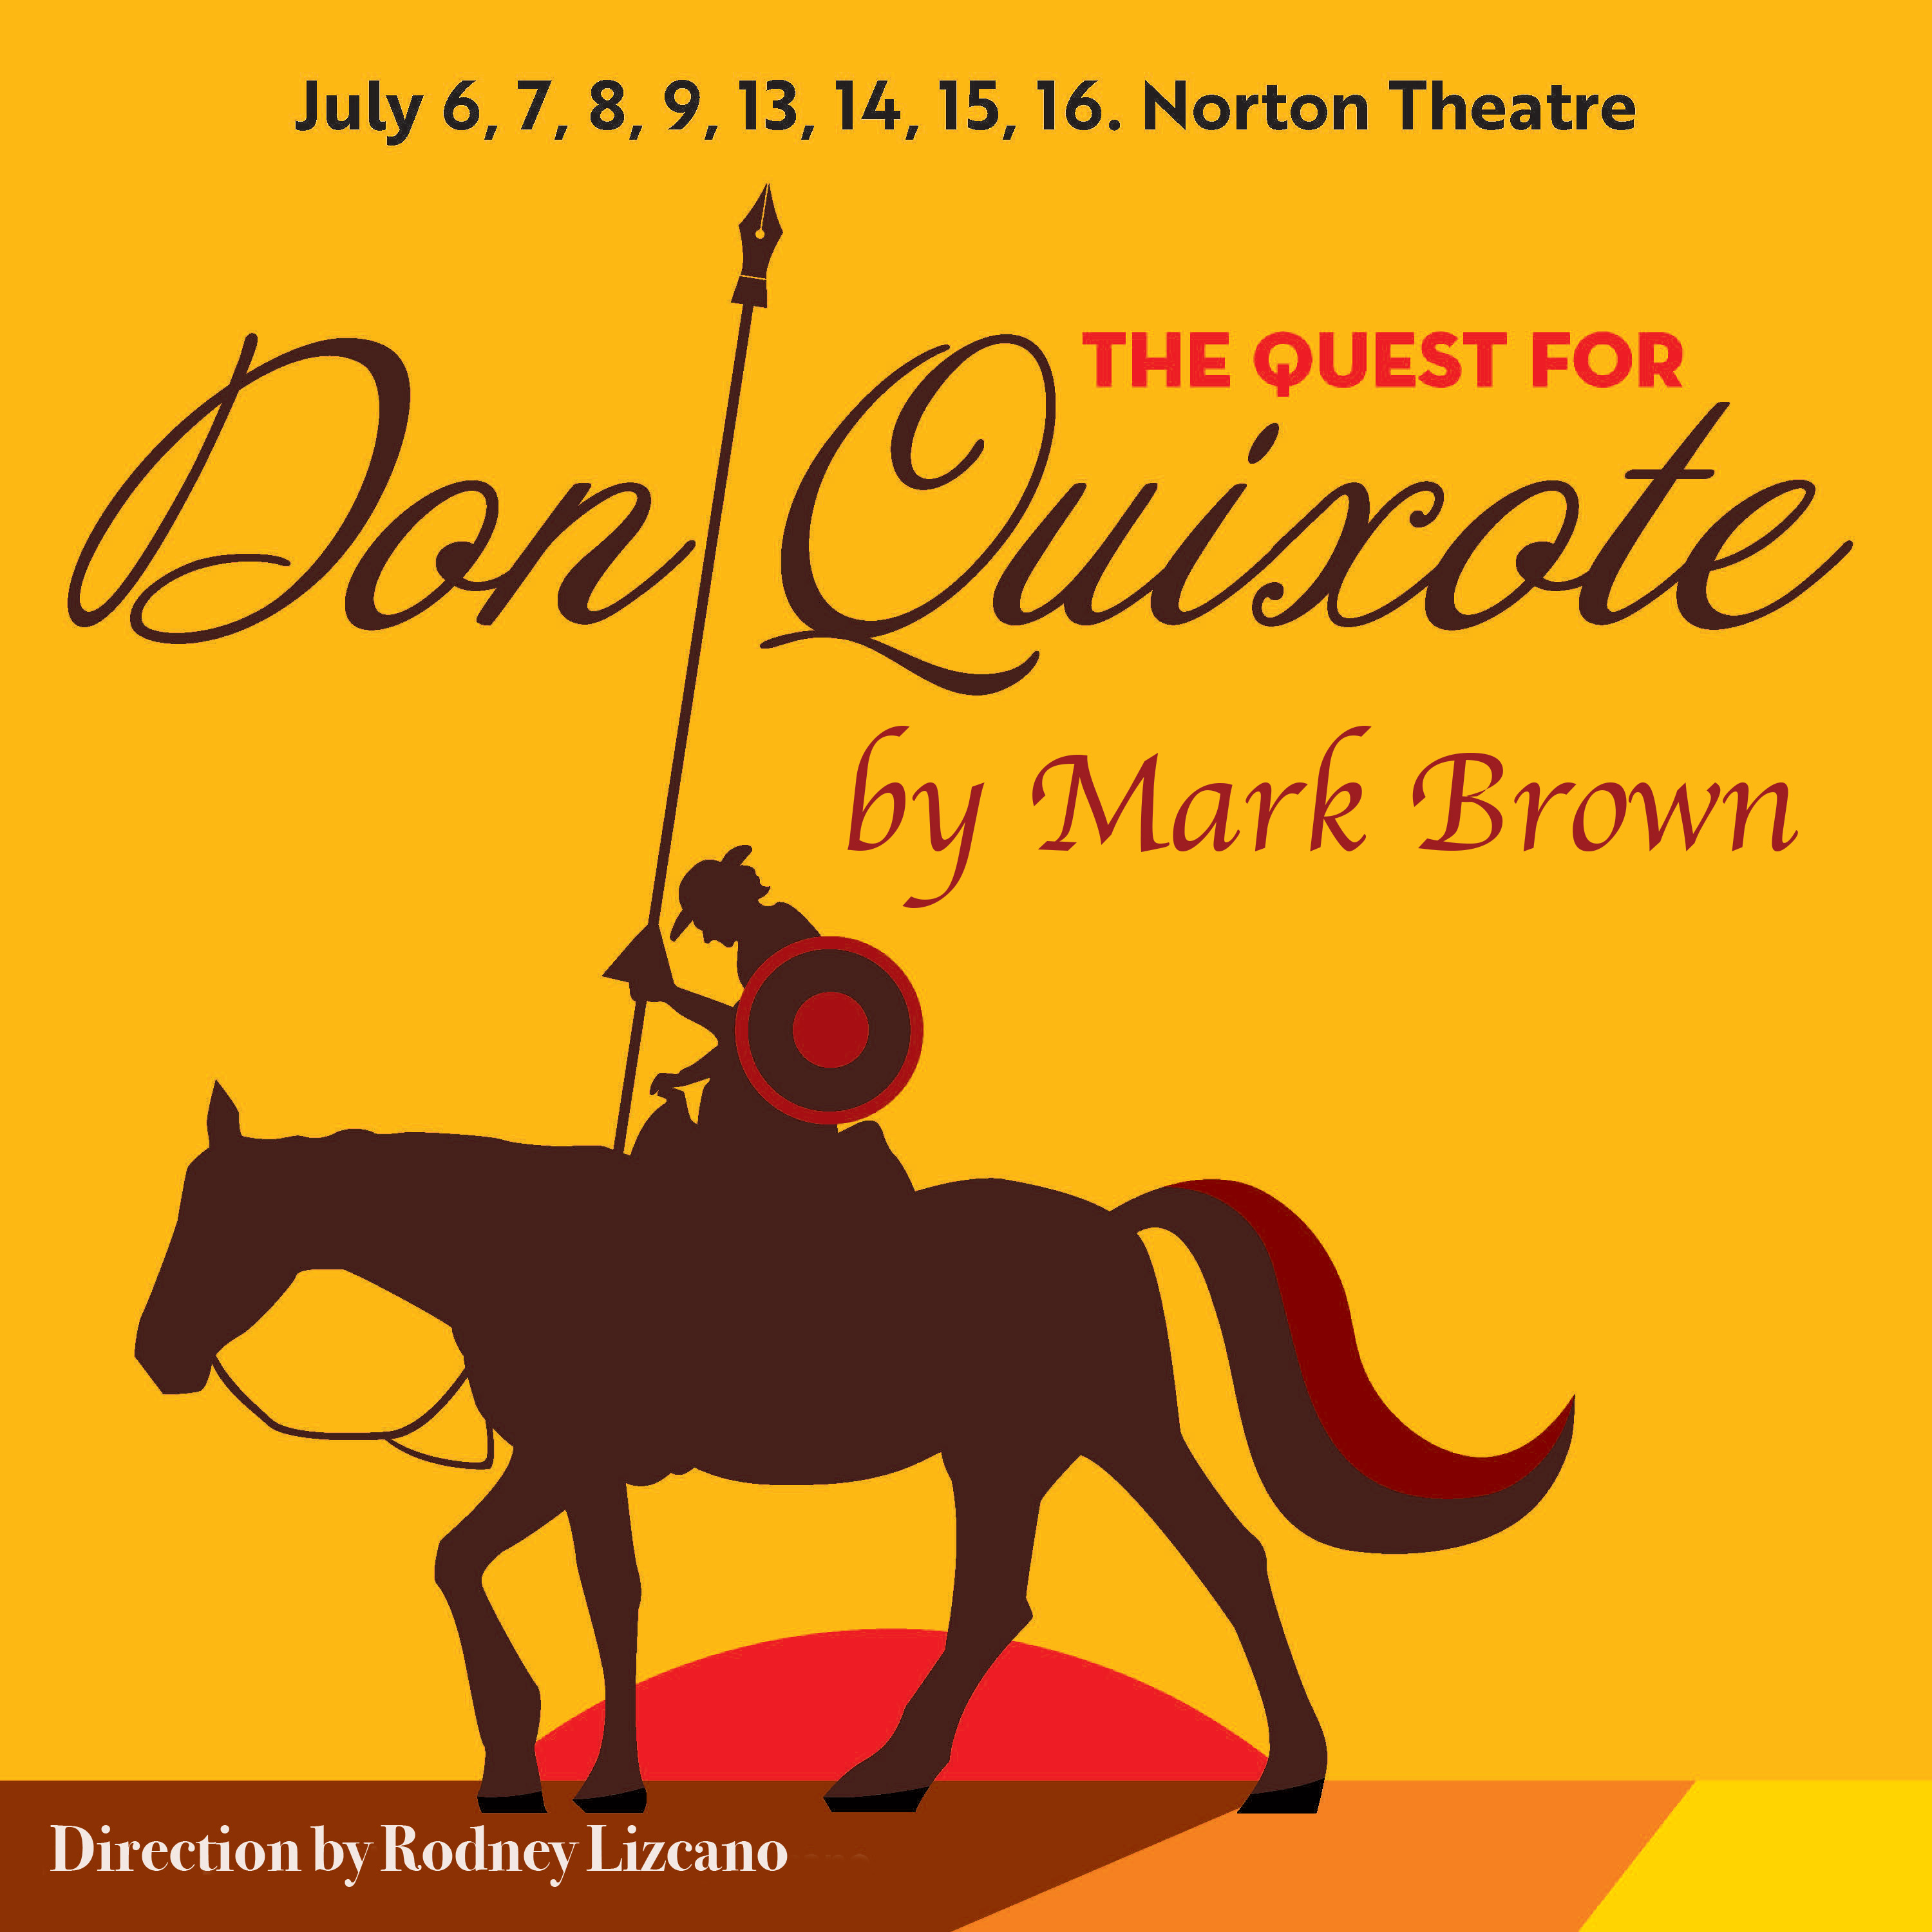 The Quest for Don Quixote Little Theatre of the Rockies 2023